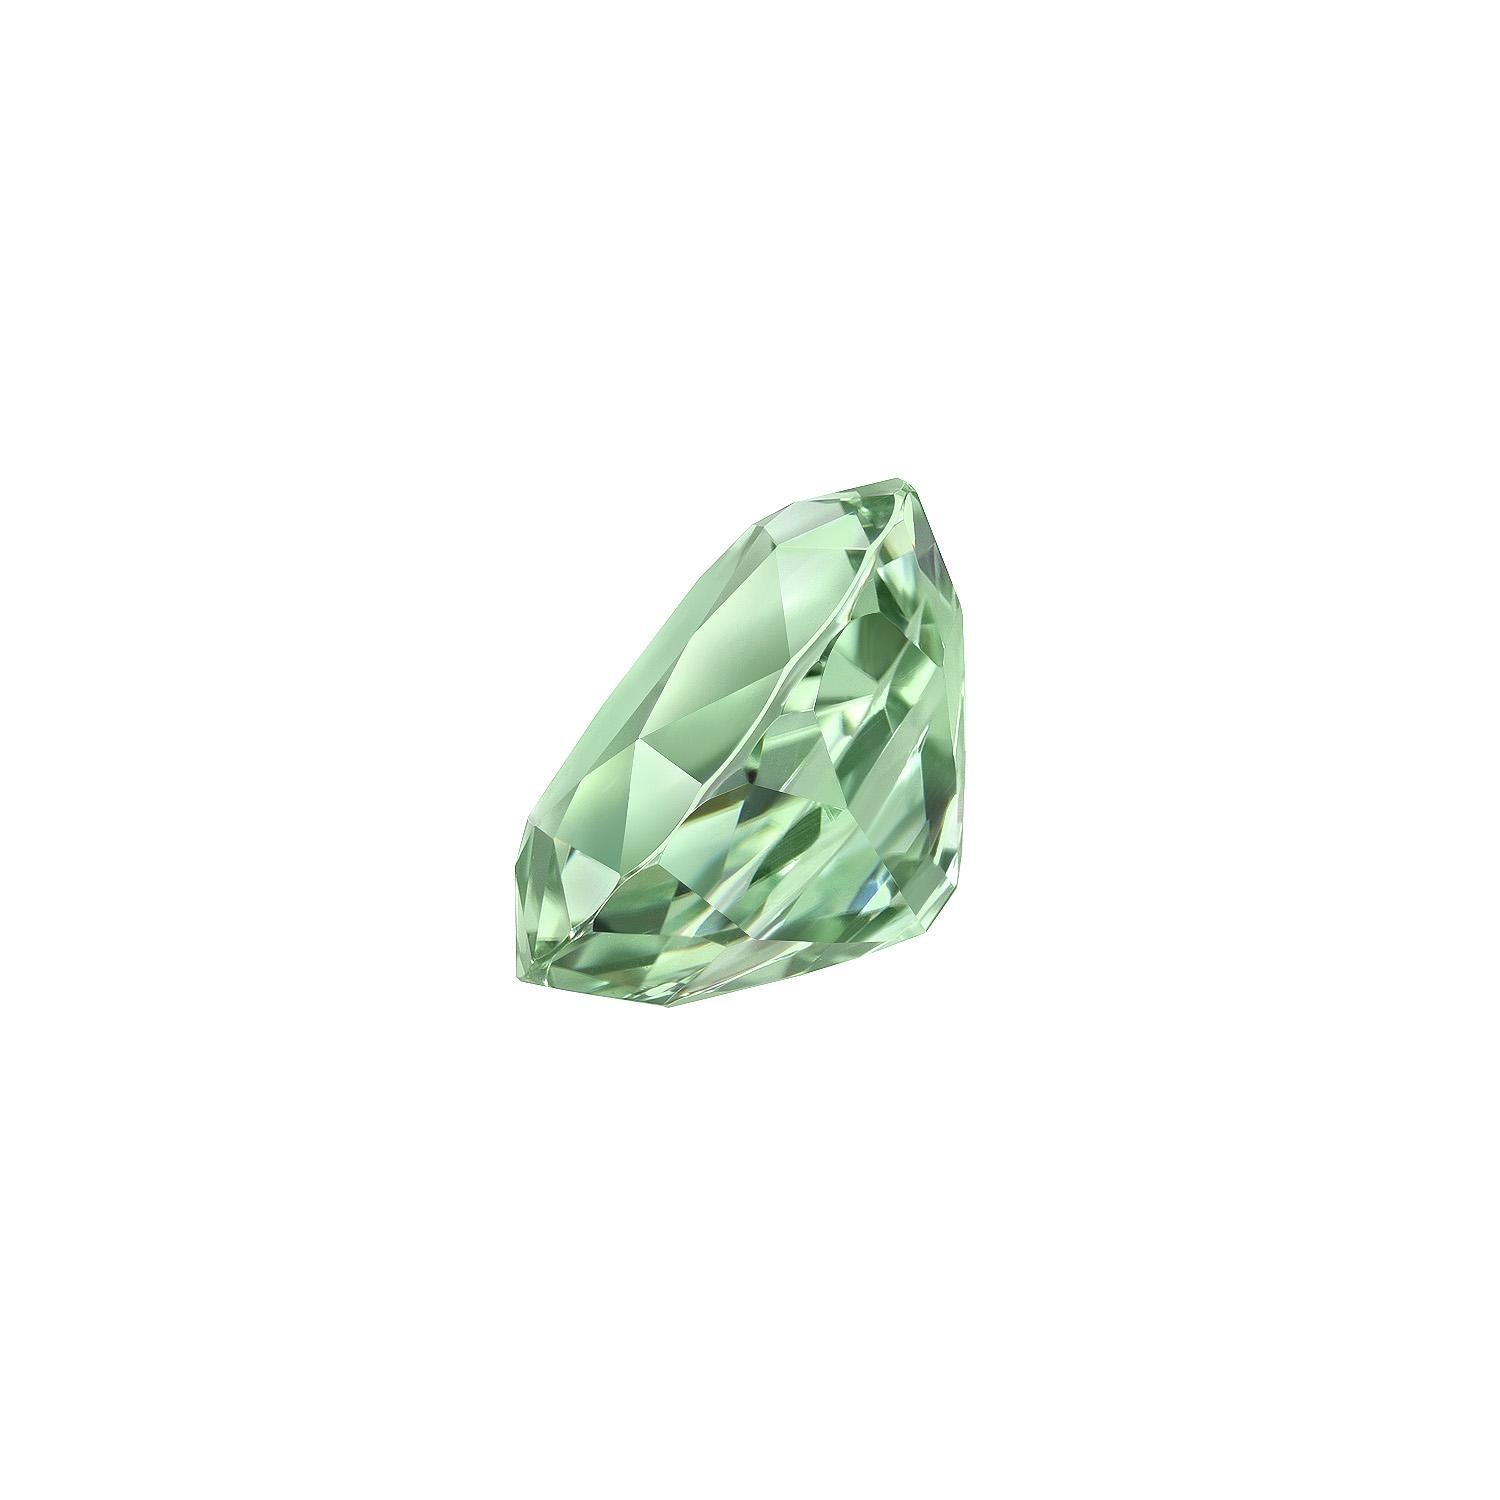 Pastel Mint Green Tourmaline oval gem, weighing a total of 5.46 carats, offered loose to a world-class gemstone lover.
Returns are accepted and paid by us within 7 days of delivery.
We offer supreme custom jewelry work upon request. Please contact